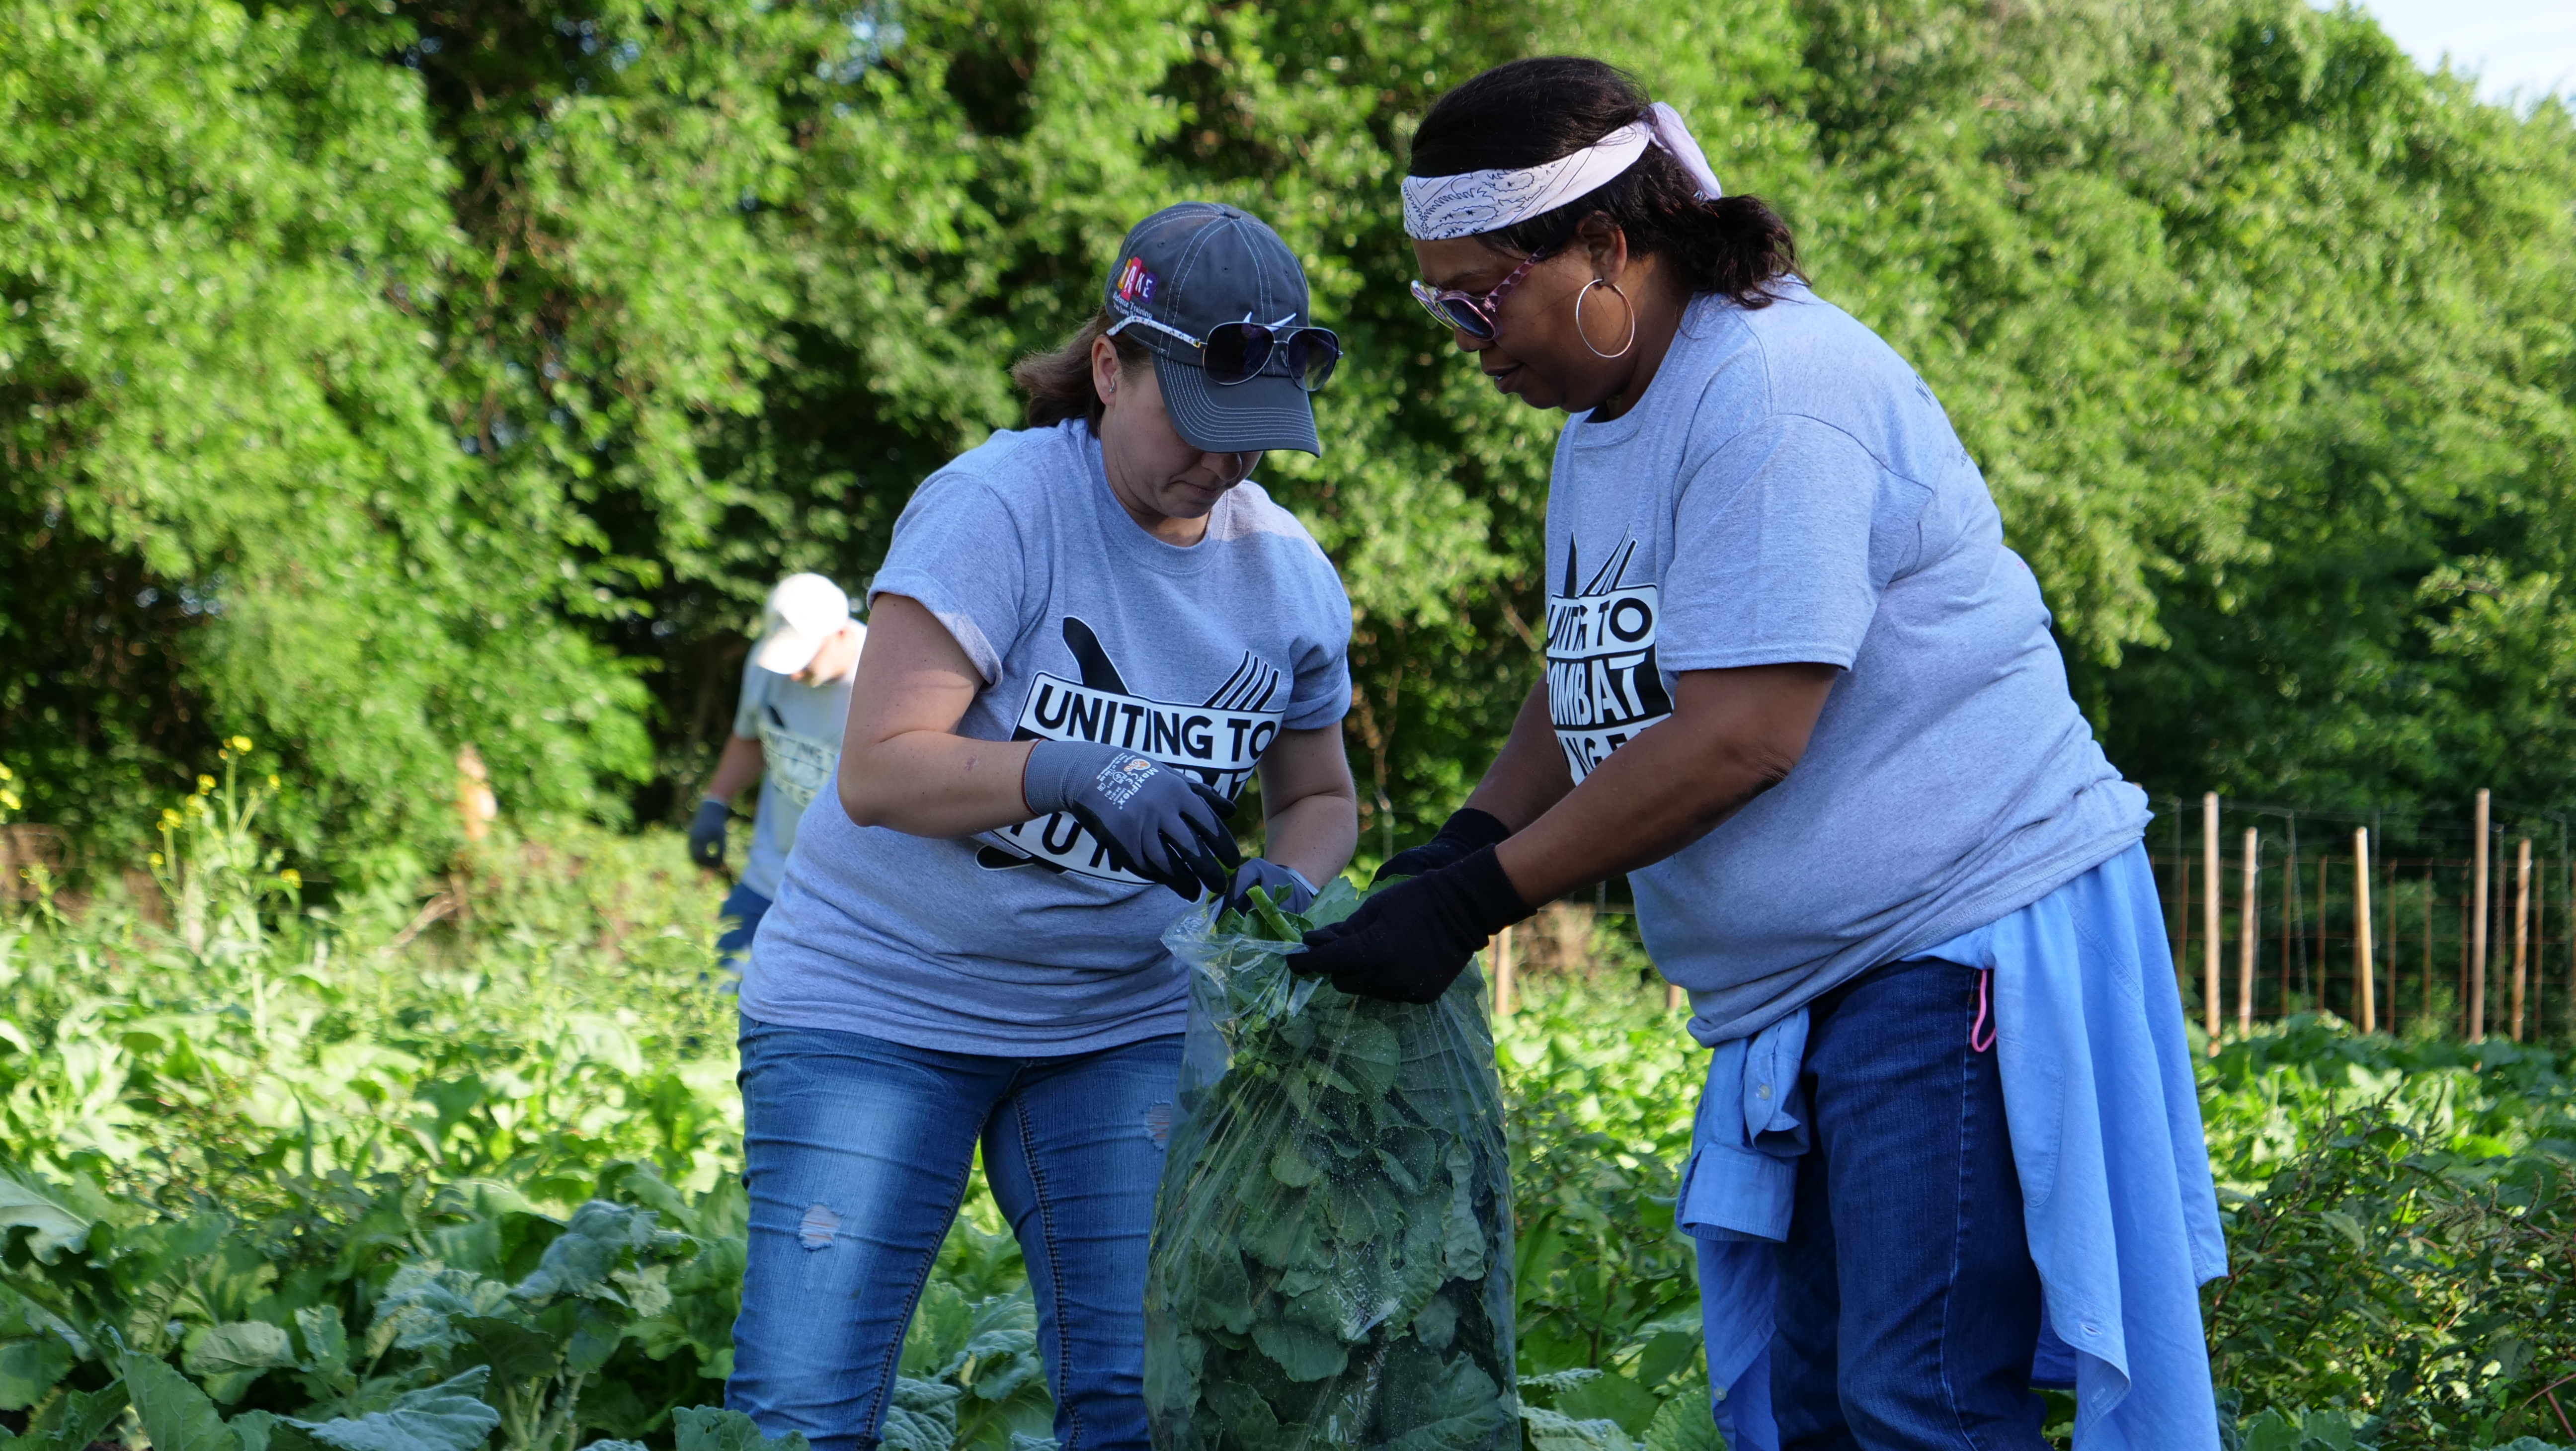 Two women participate in a farm gleaning event in support of Uniting to Combat Hunger